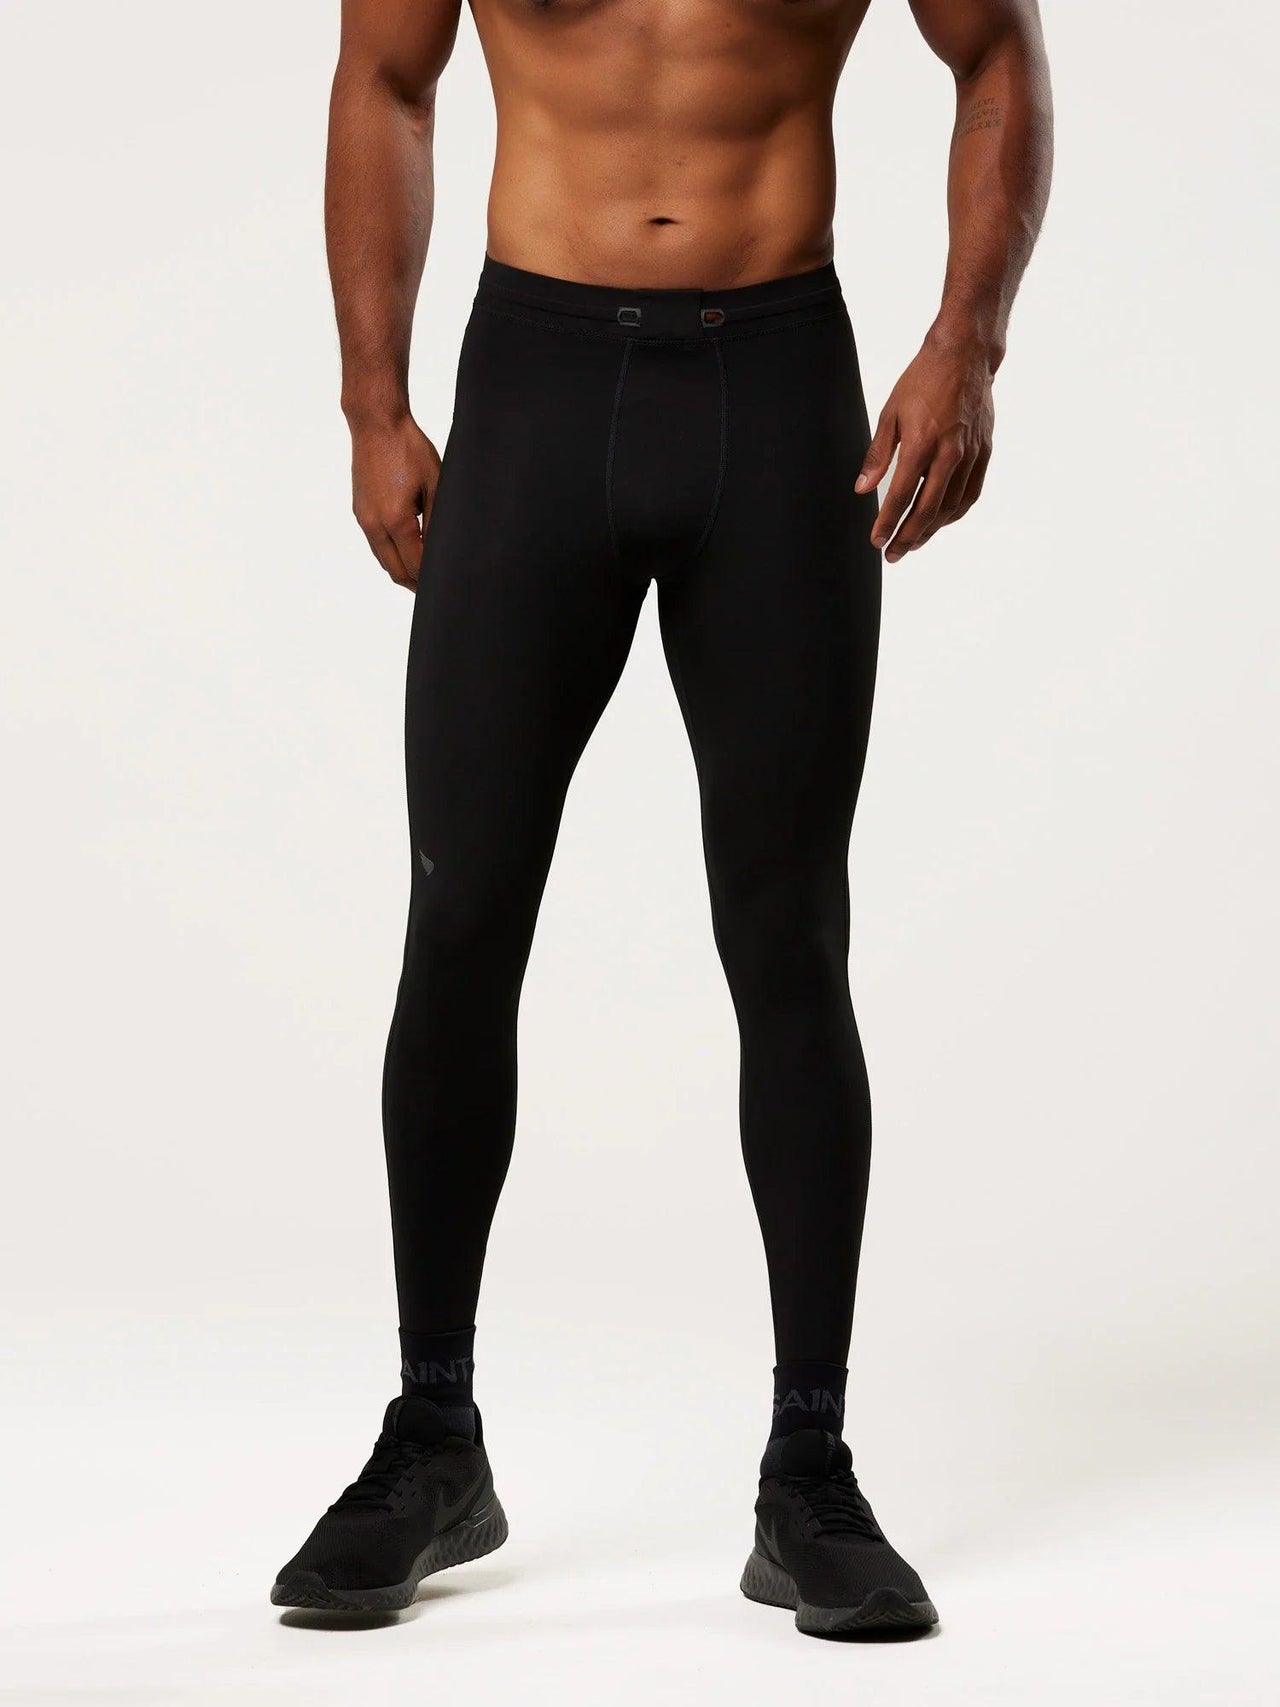 Nike Men's Zonal Strength Performance Compression Running Tights